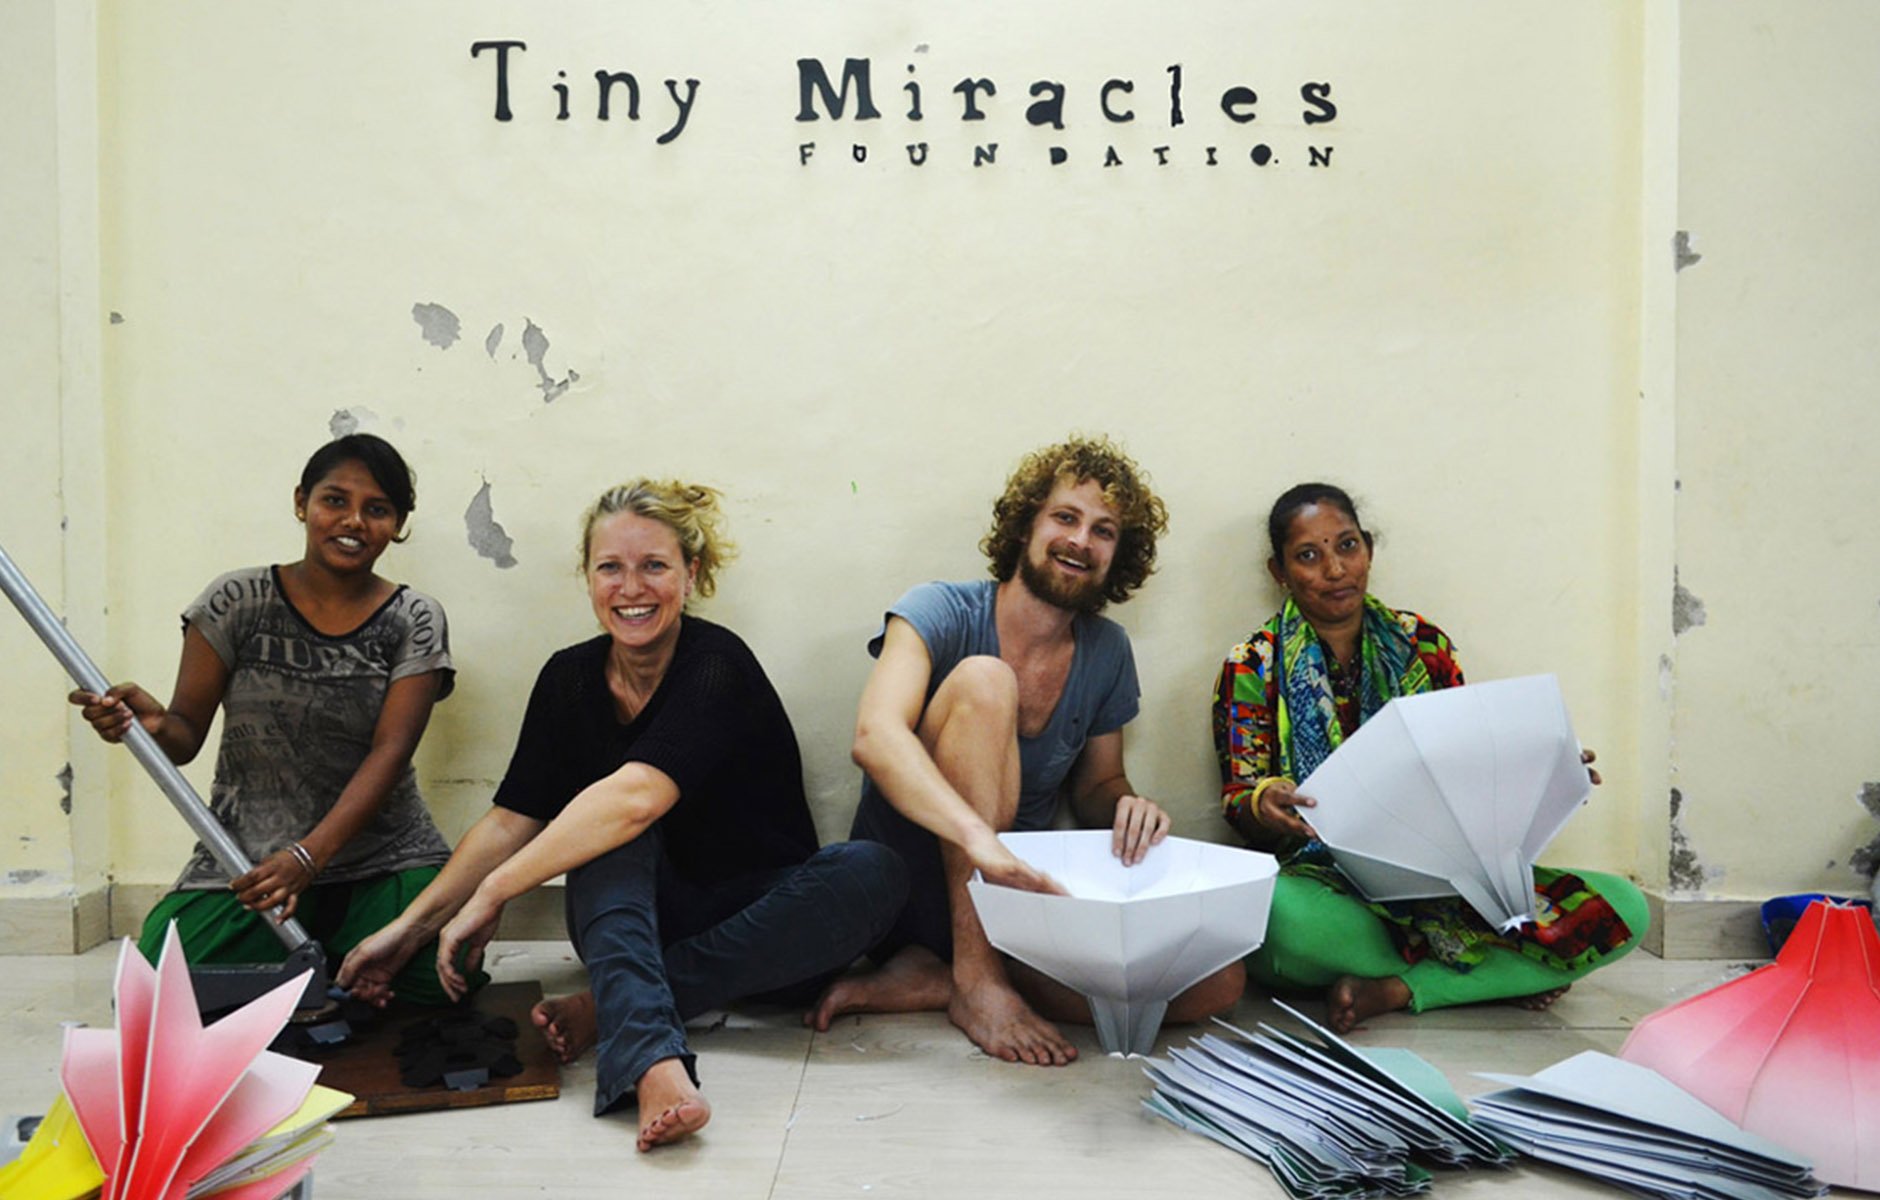 Philanthropist and founder of Tiny Miracles, Laurien Meuter, with designer Pepe Heykoop and members of the Paper Vase design team in Mumbai. Photo c/o Tiny Miracles. 